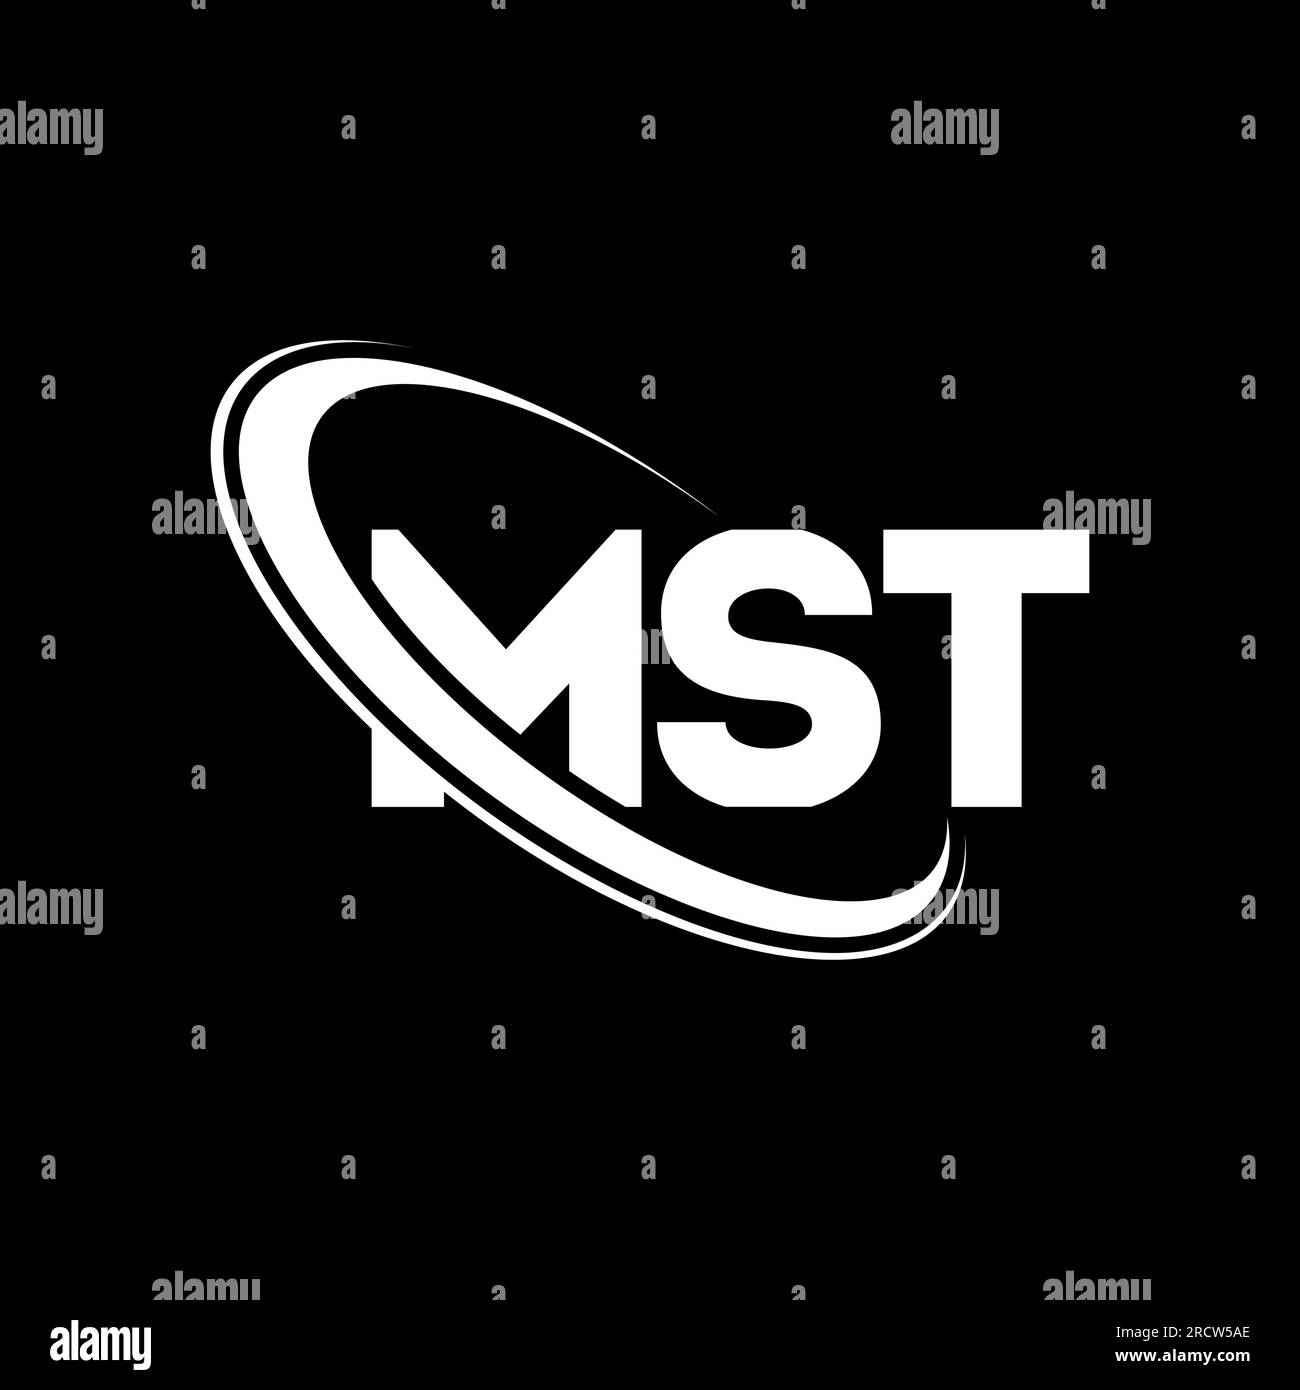 Mst font Black and White Stock Photos & Images - Alamy